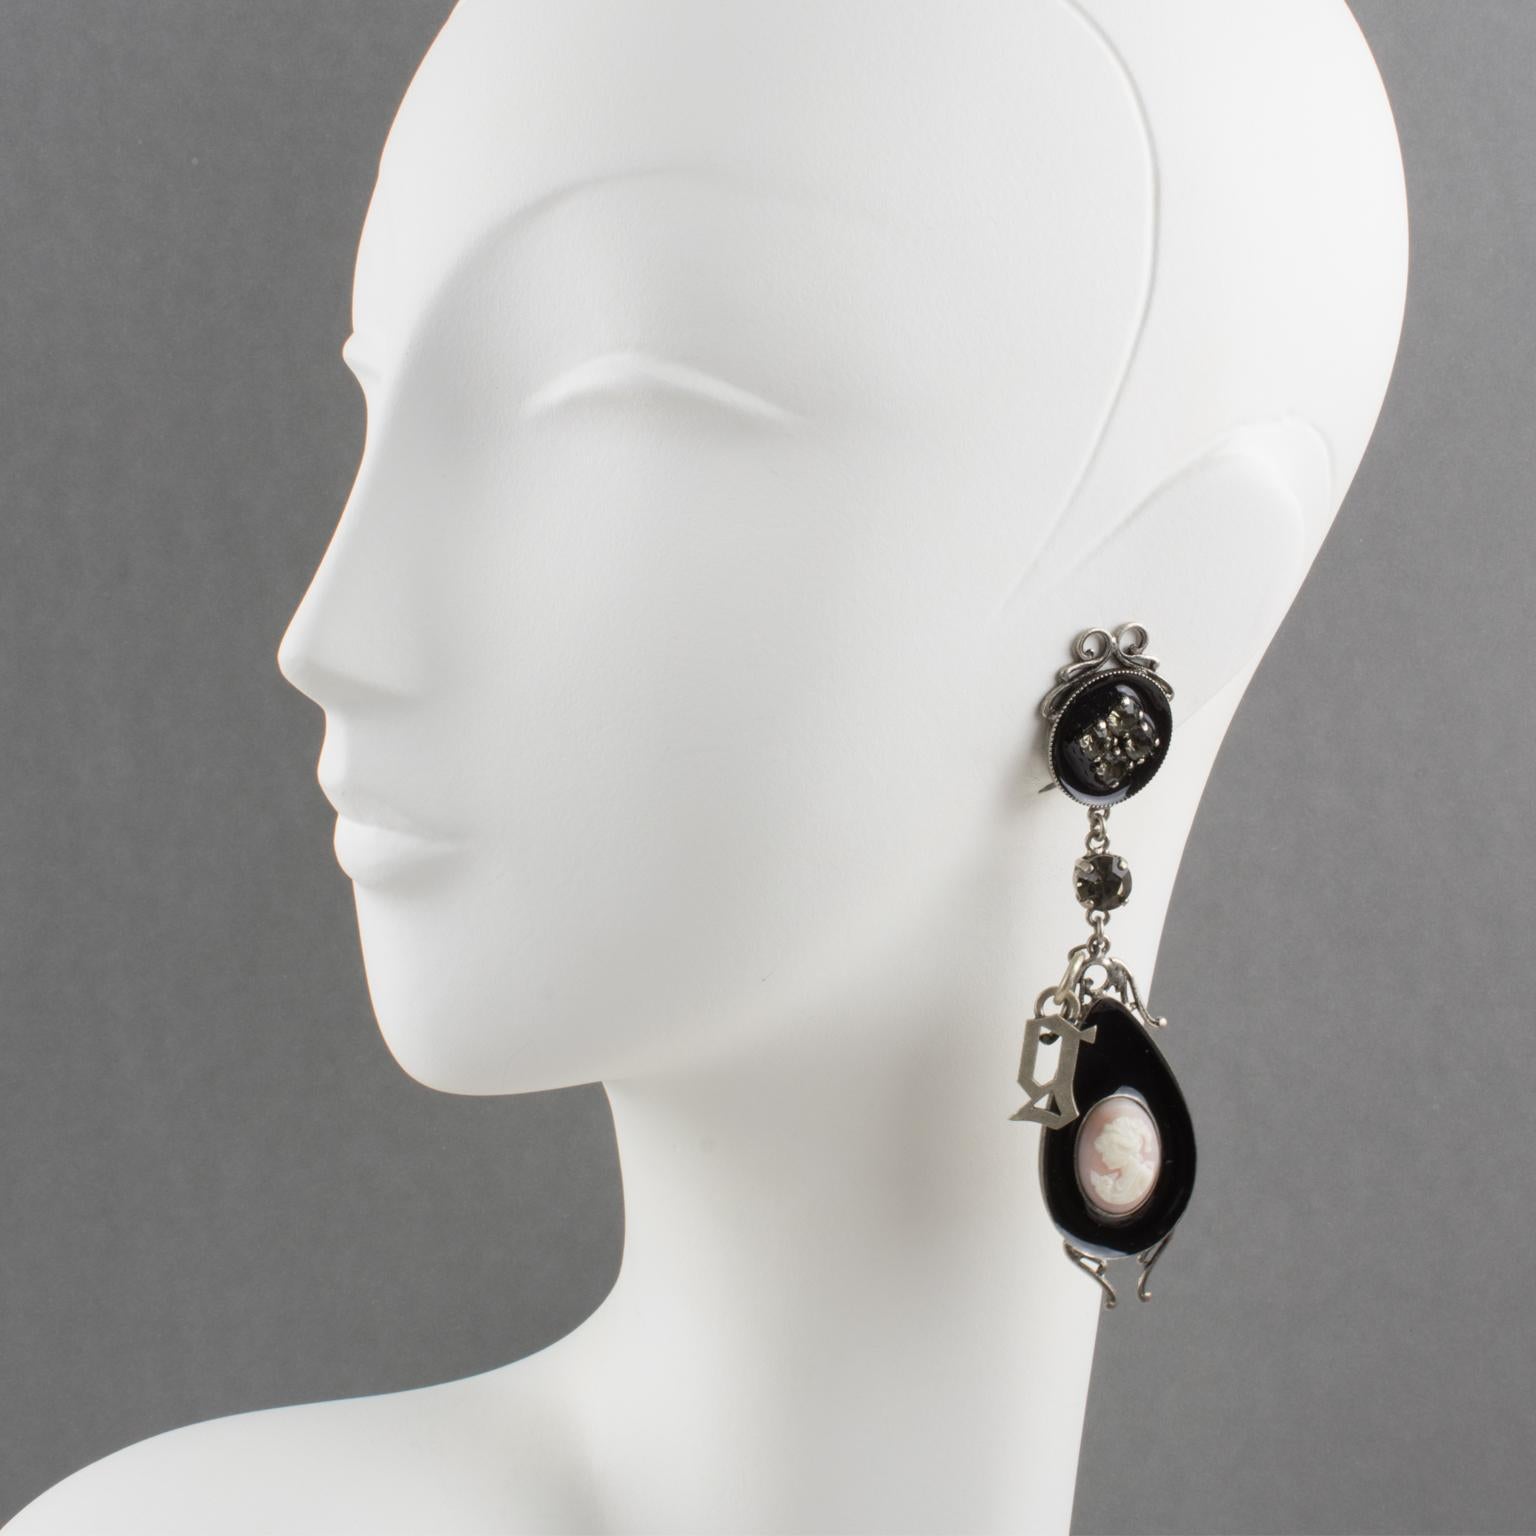 These sophisticated John Galliano Paris clip-on earrings feature a Victorian-inspired design made with silvered metal framing topped with black enamel and resin cameo and complemented with smoked crystal rhinestones. The dangling 